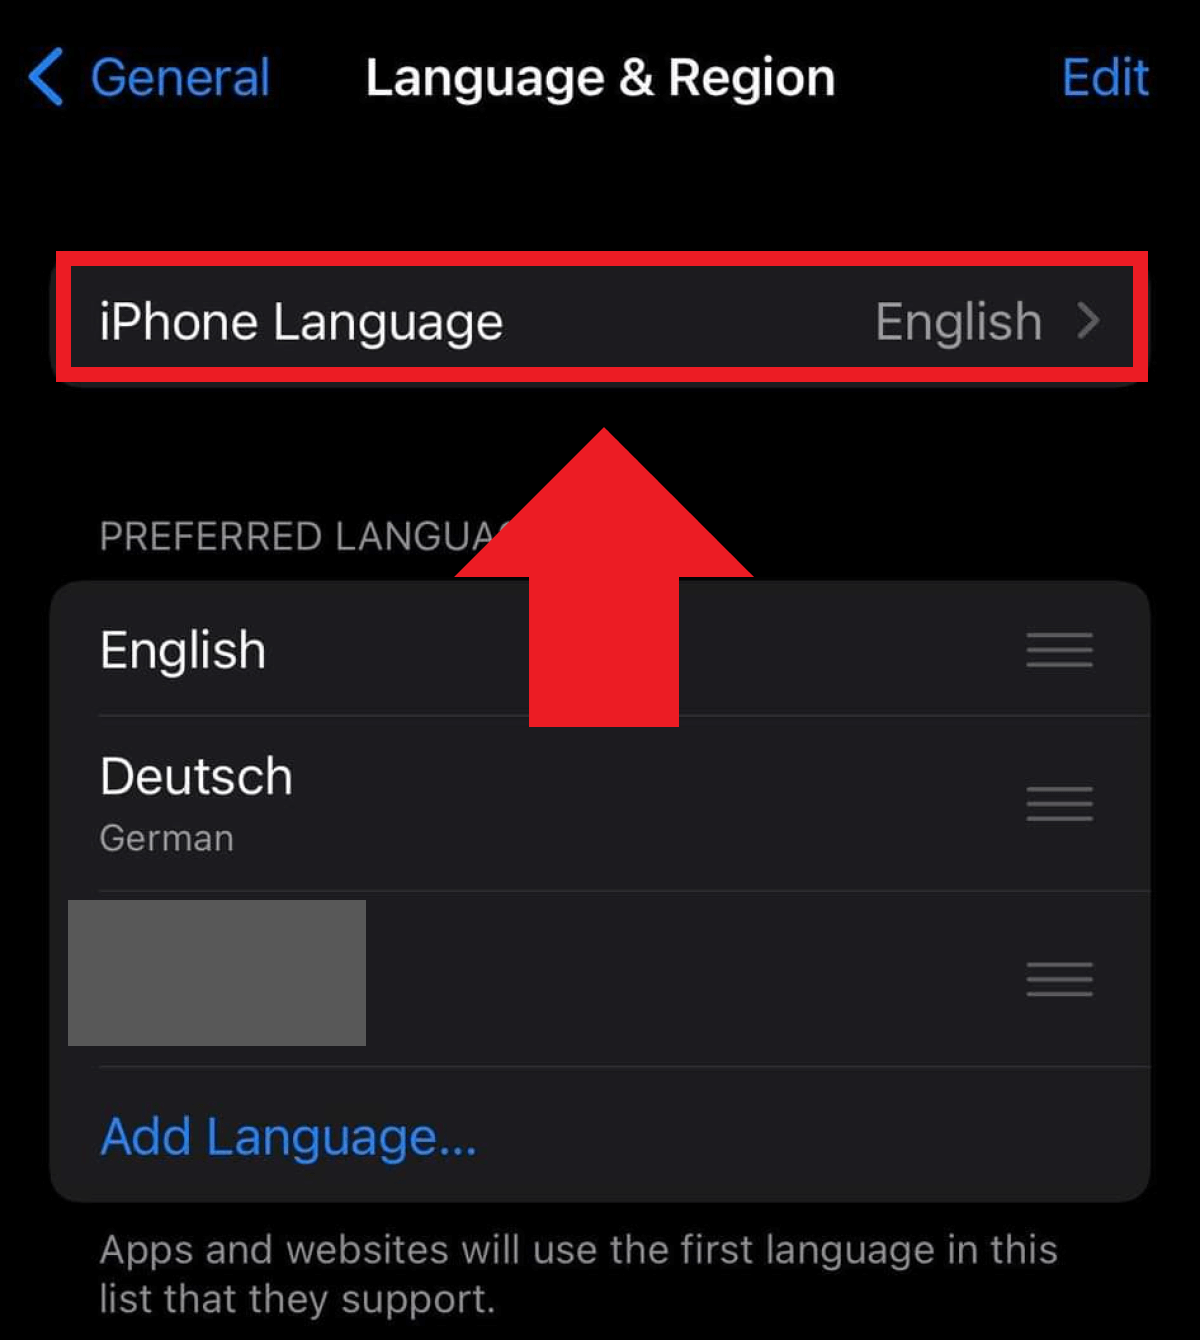 Available system languages in the iOS language settings